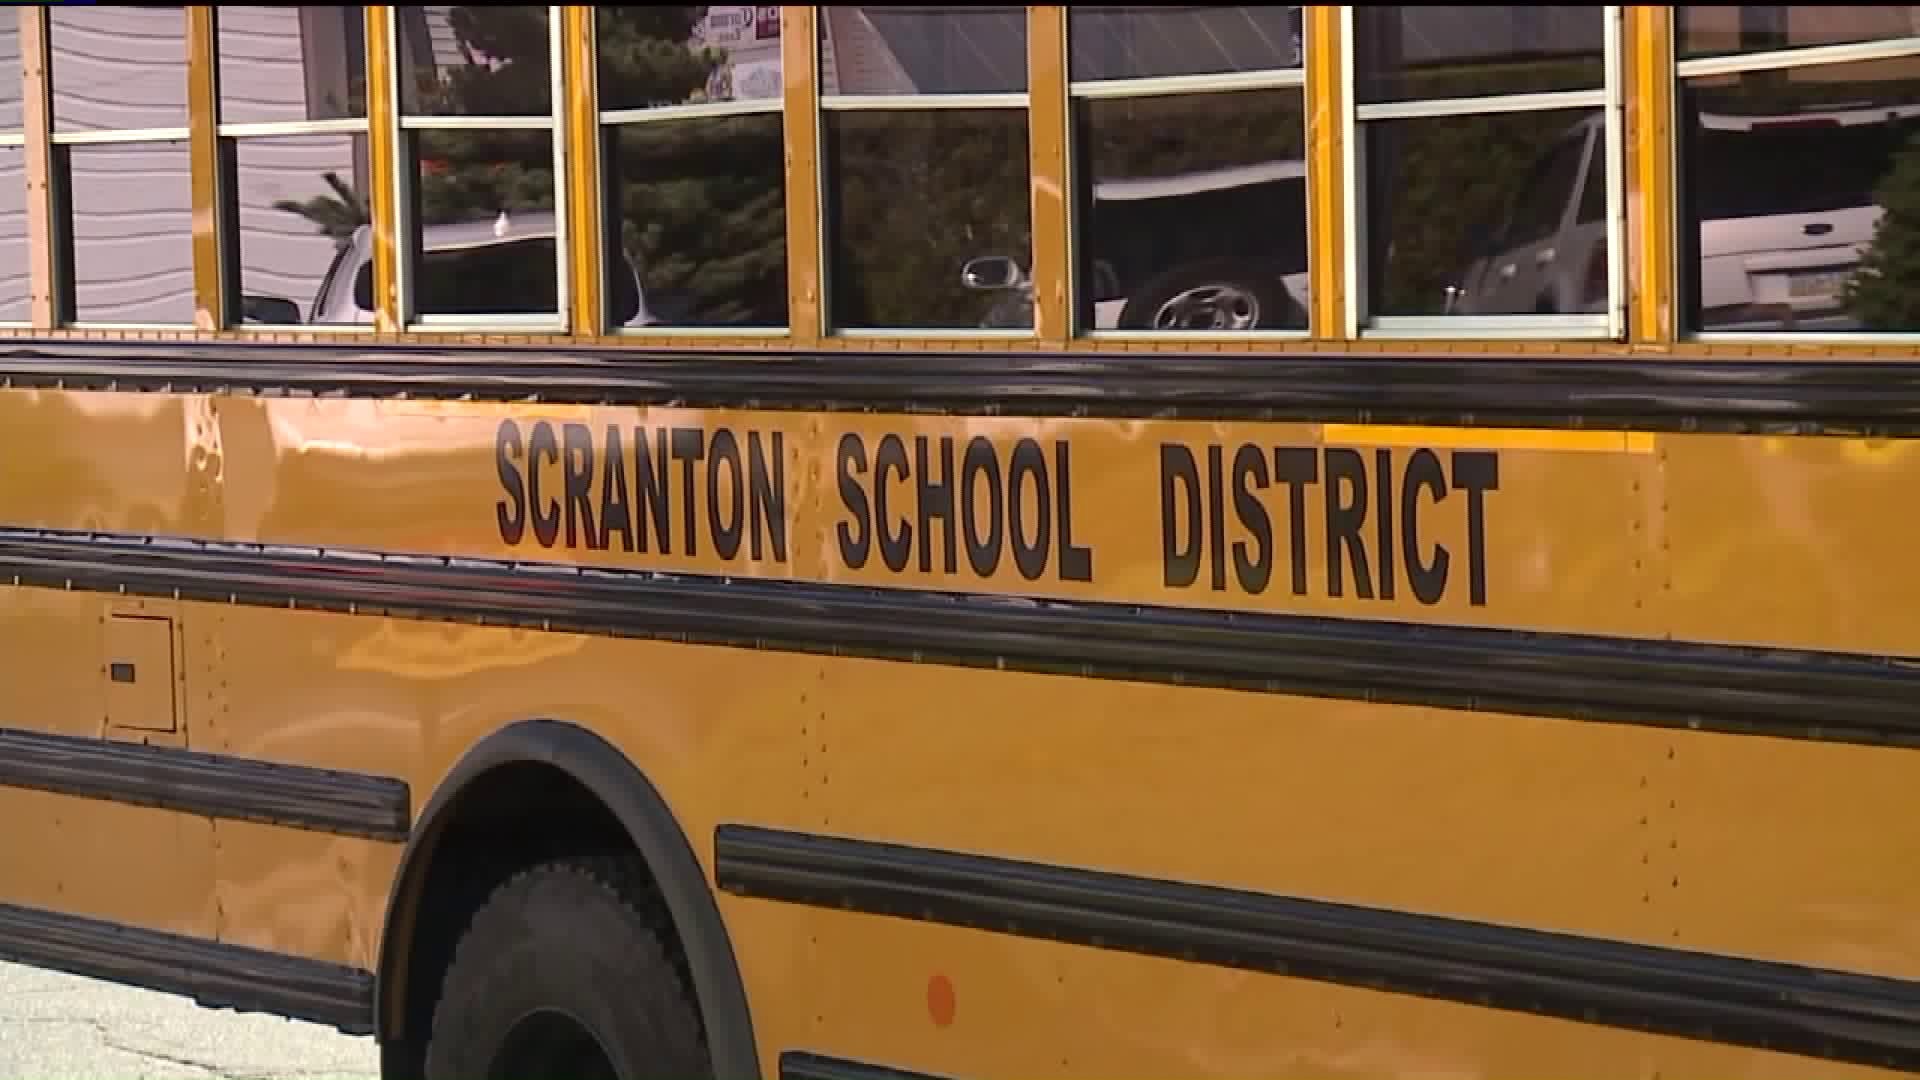 State Auditor General Rips Scranton School District in Scathing Report